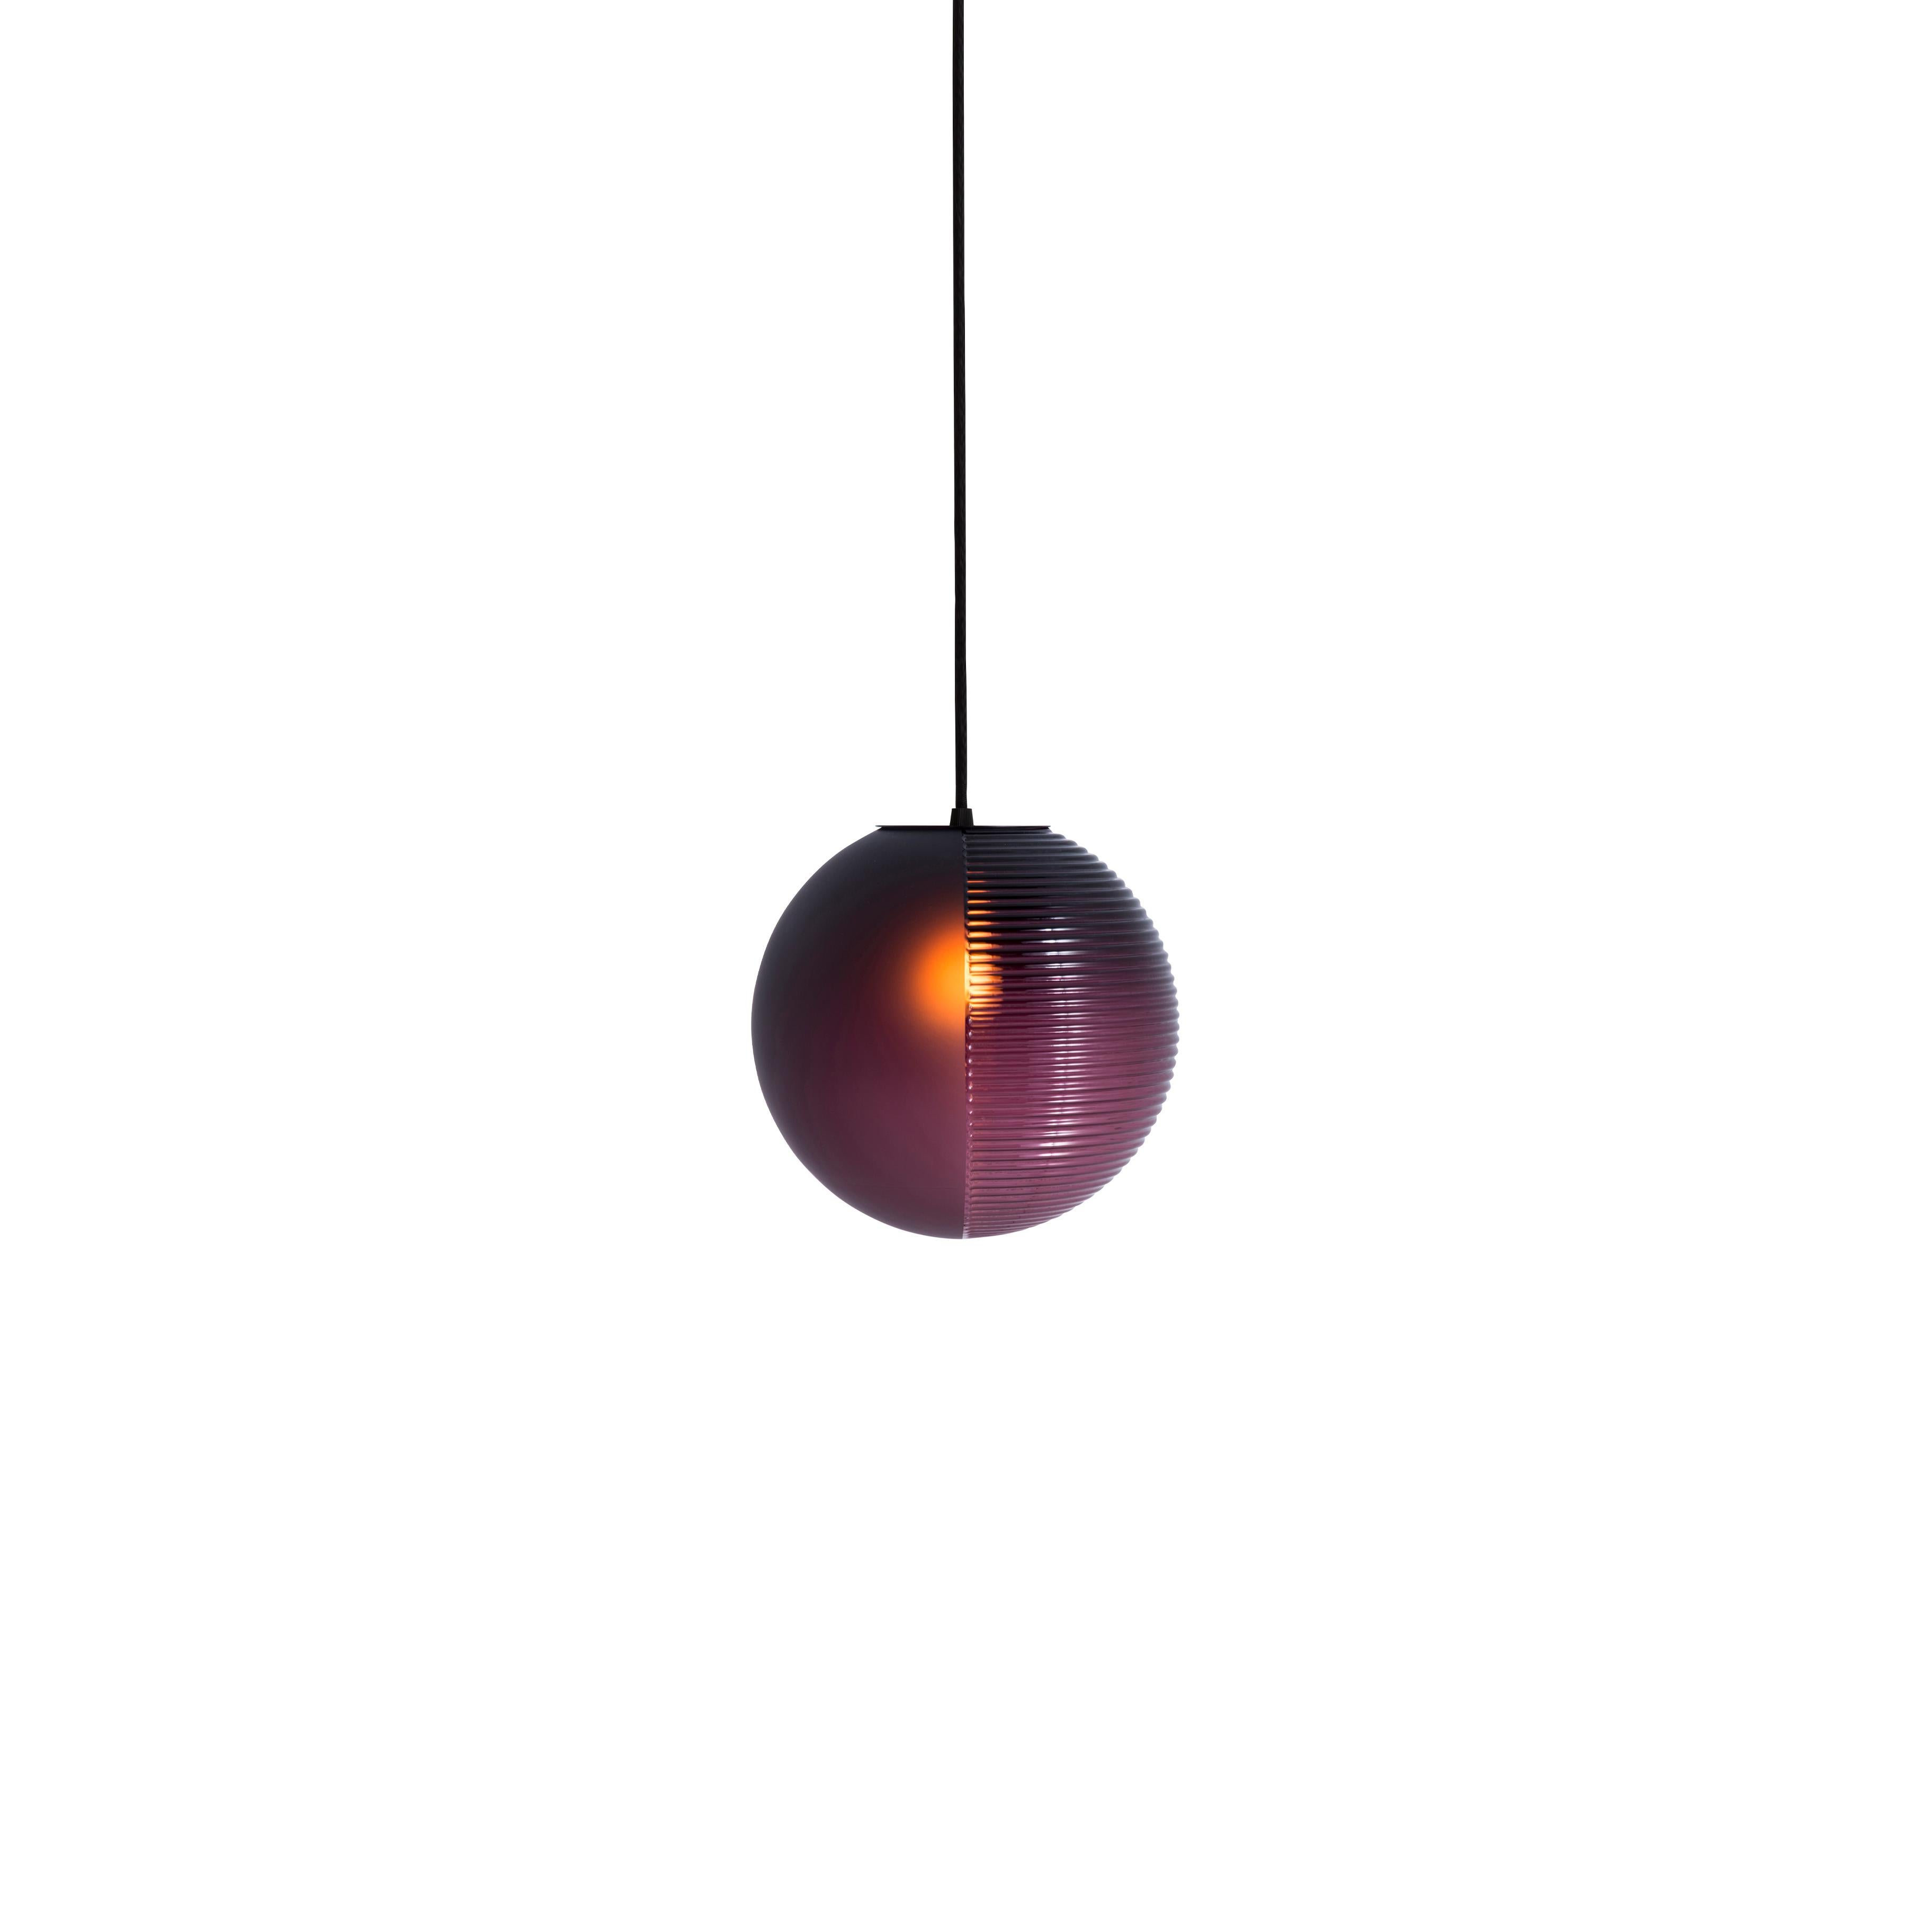 Stellar mini Aubergine Acetato Aubergine pendant by Pulpo.
Dimensions: D18 x H320 cm
Materials: handblown glass coloured, stainless steel wire, textile cable.

Also available in different finishes: aubergine acetato aubergine, smoky grey acetato